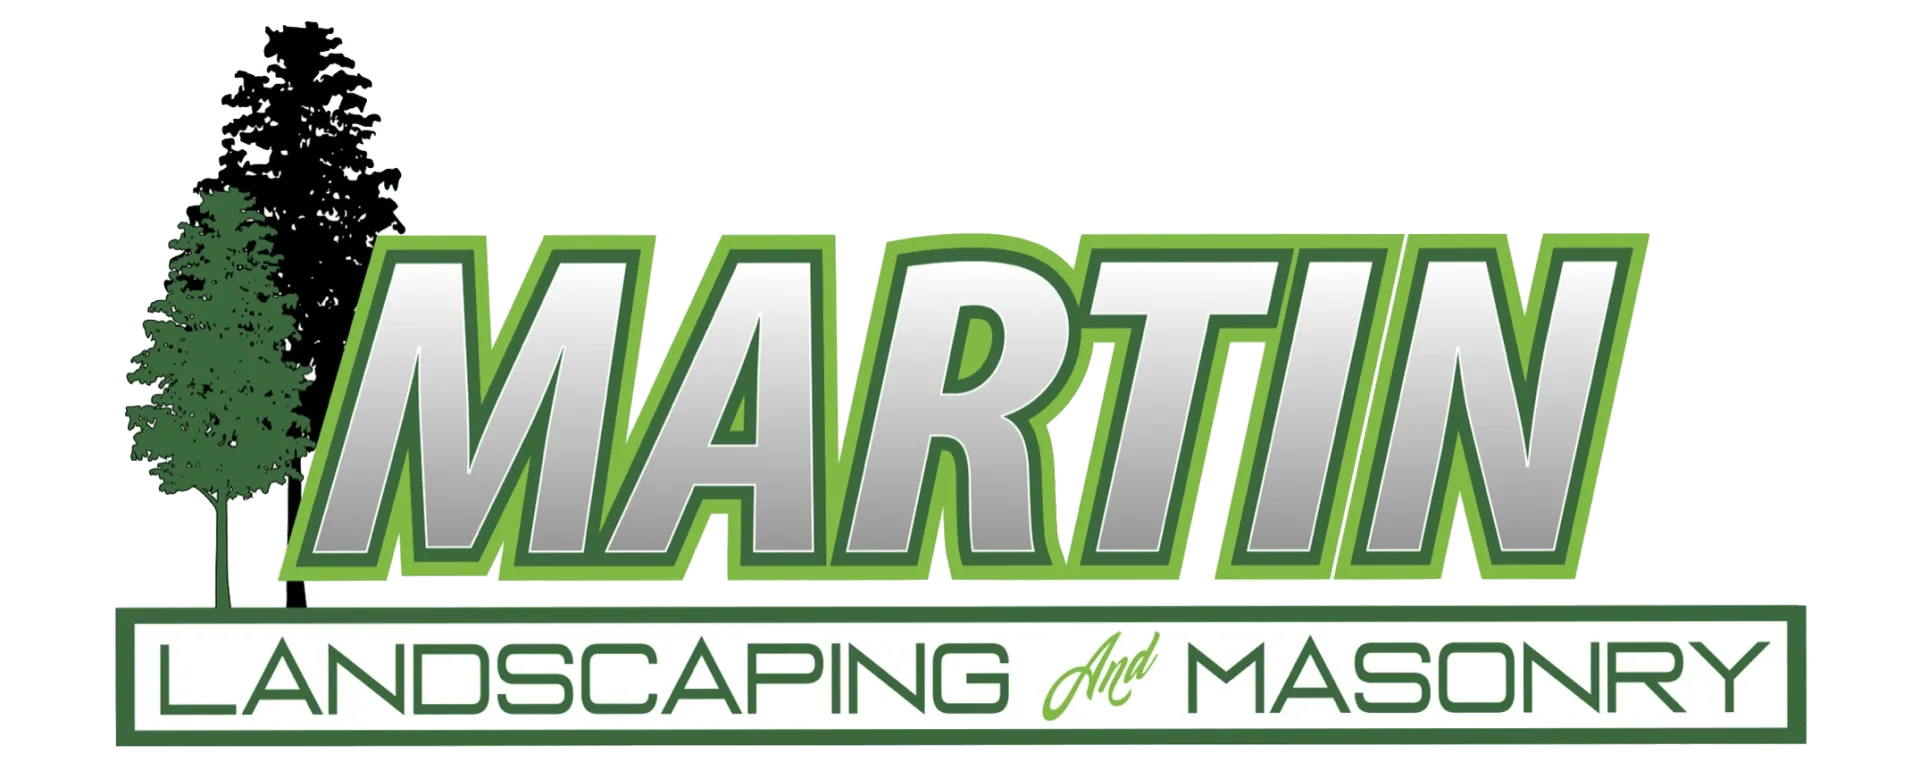 Martin landscaping and masonry is a company which provides different services.